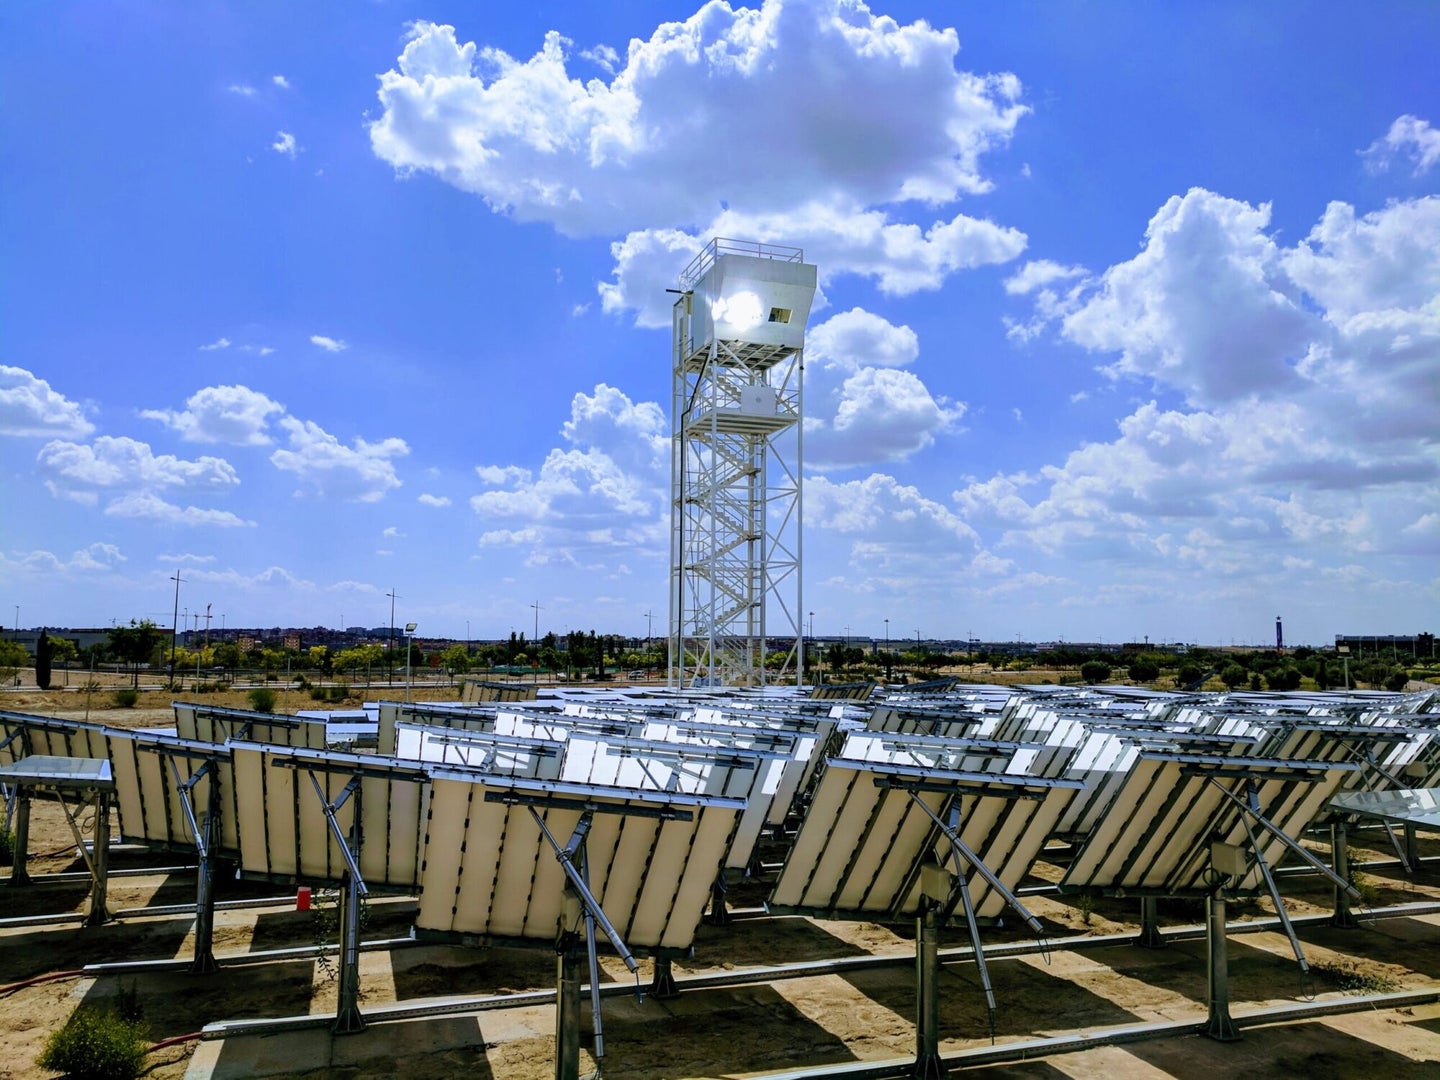 In the ceramic box atop a solar tower, a chemical reaction takes place that makes jet fuel.